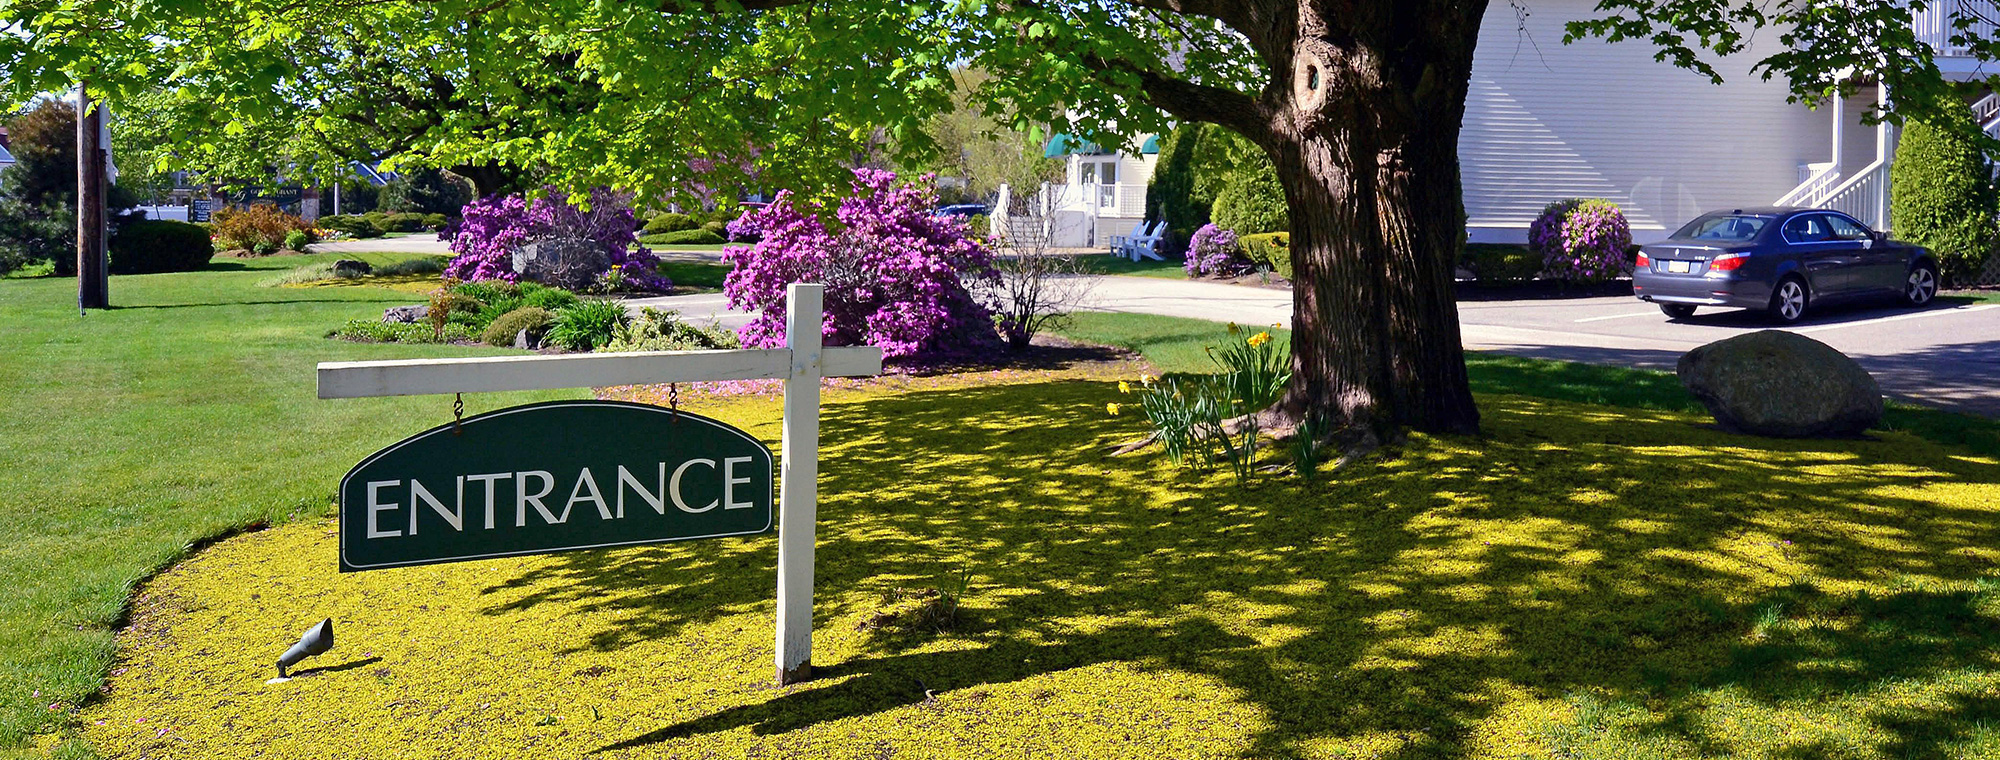 Entrance sign in front of tree on grass near parked cars in Ogunquit, ME